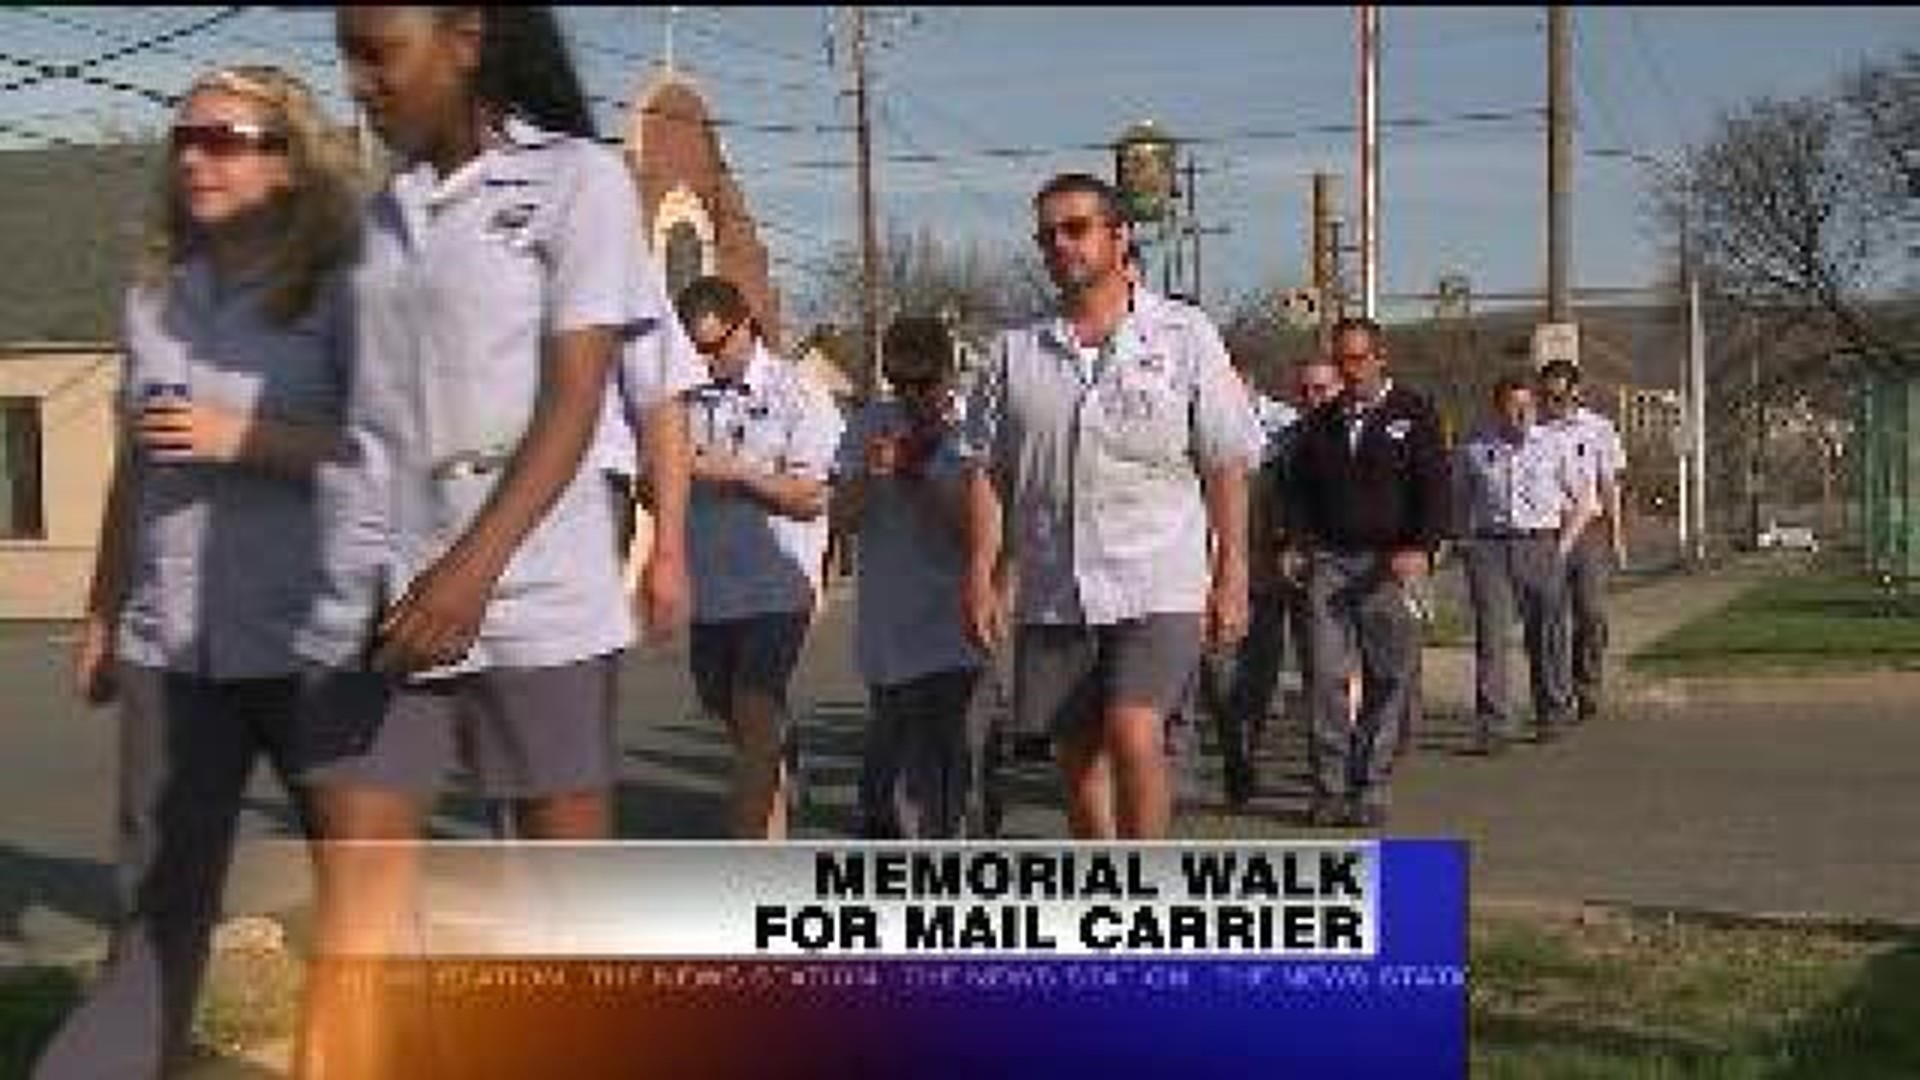 Show of Support for Mail Carrier Who Died After Fire